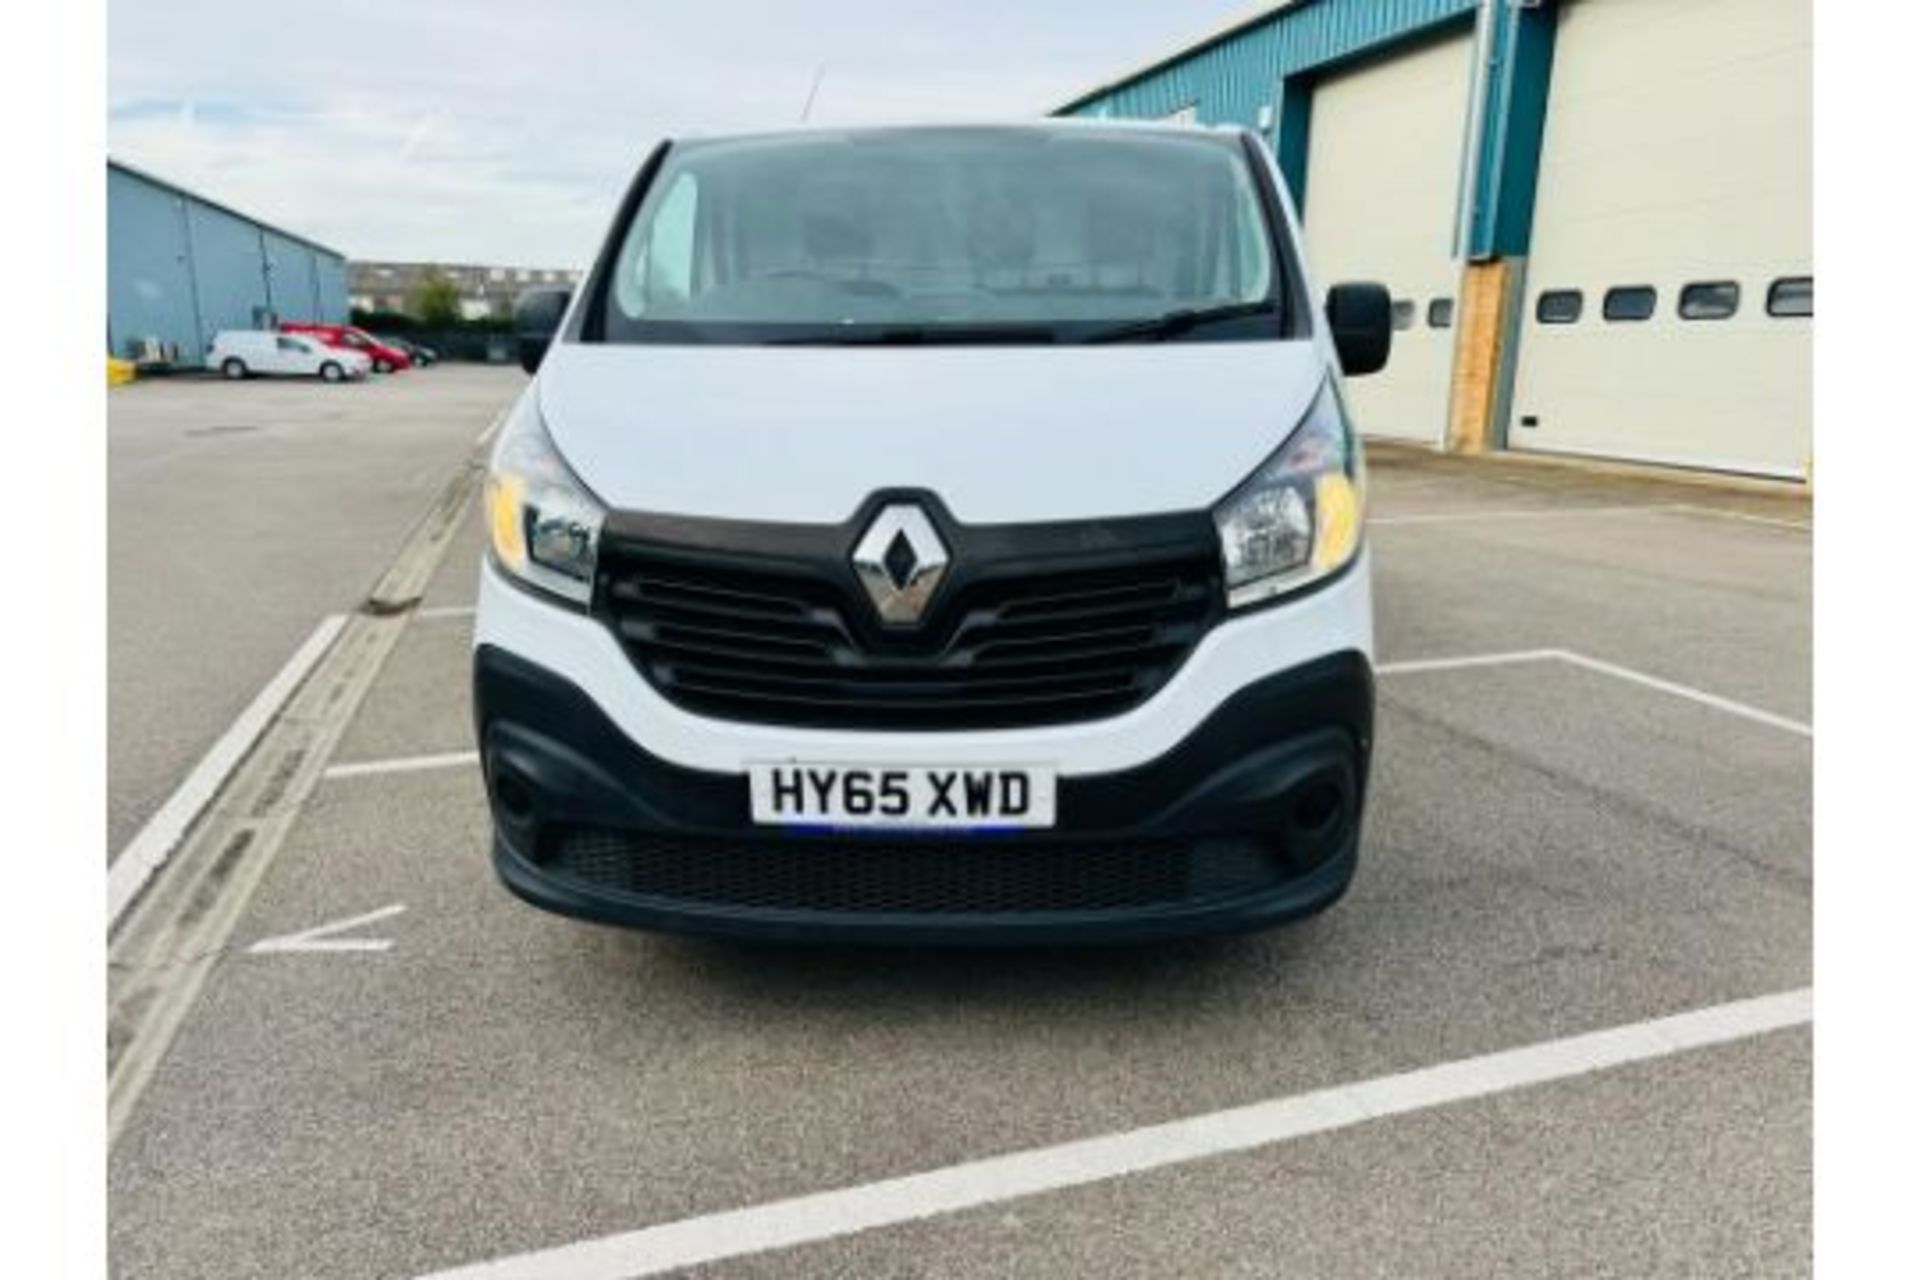 RENAULT TRAFFIC 1.6L SL29 DCI 115 (2016 MODEL) FULLY PLY LINNED - SERVICE HISTORY - 58K MILES ONLY - Image 6 of 19